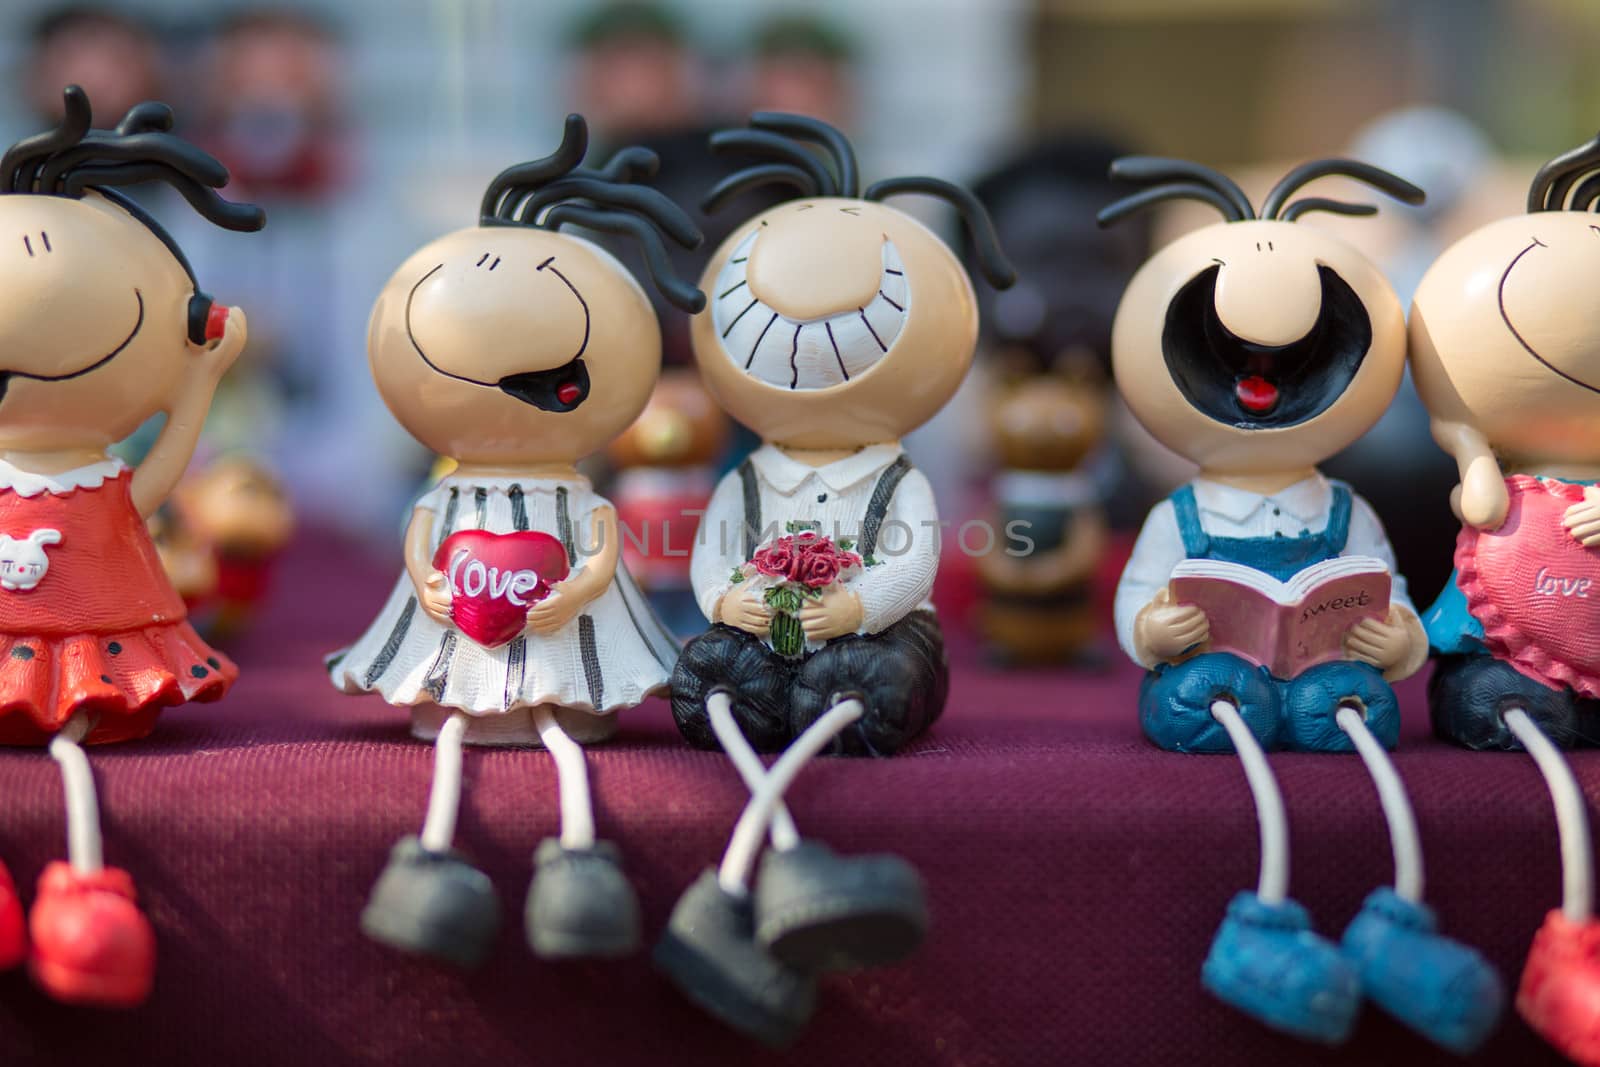 Little funny dolls in a market in Hangzhou, China 2013